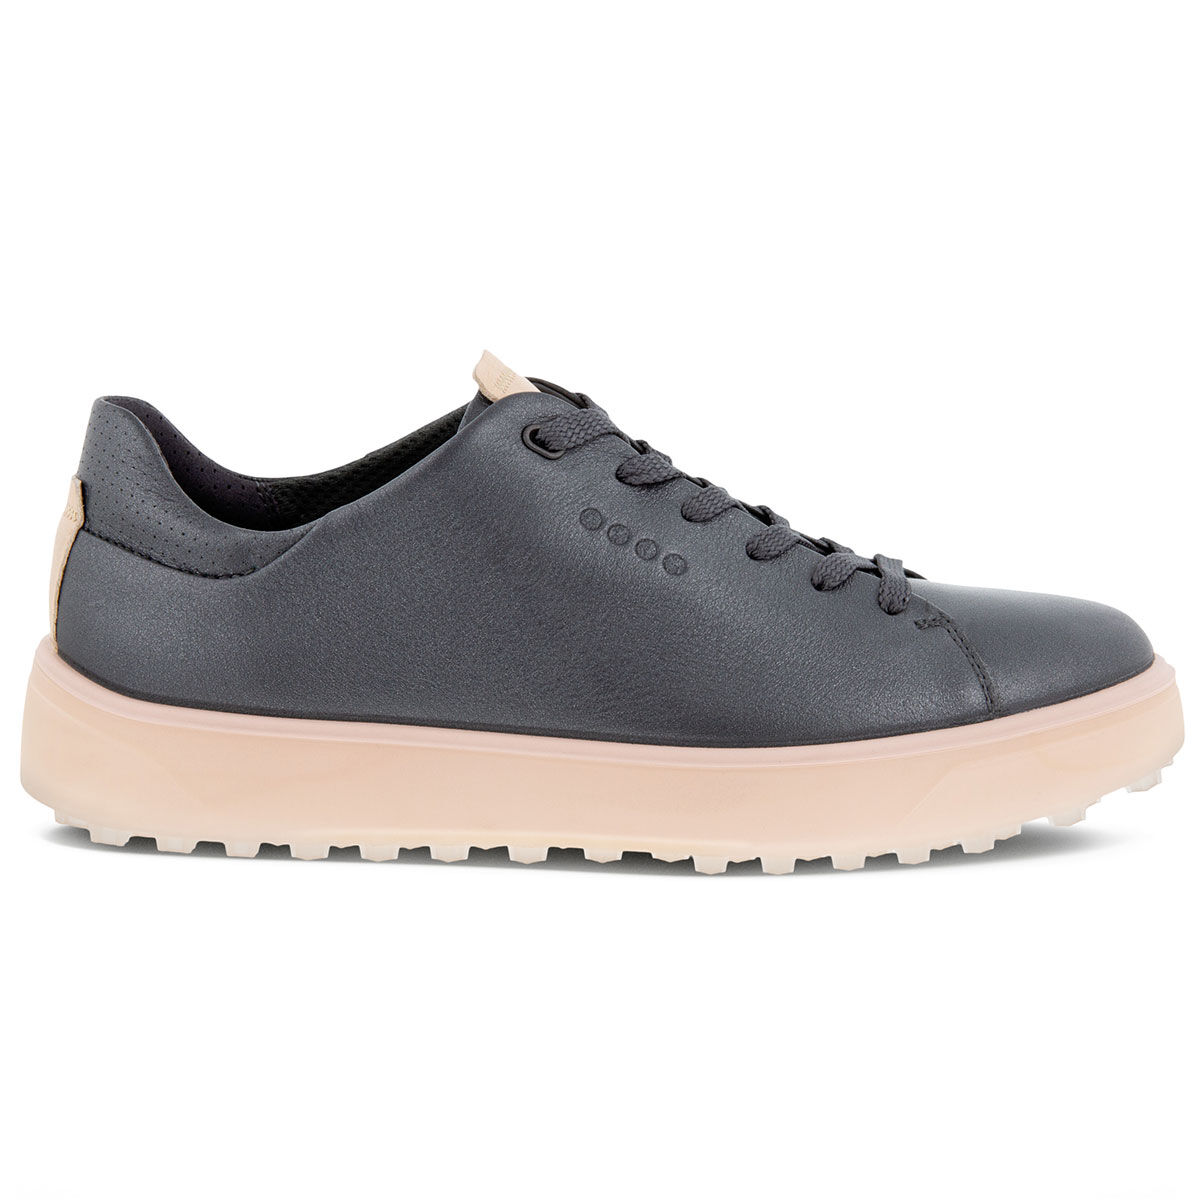 Chaussures ECCO Golf Tray pour femmes, femme, Magnet, 5-5.5, Normal  | Online Golf 390875 194890308398.0